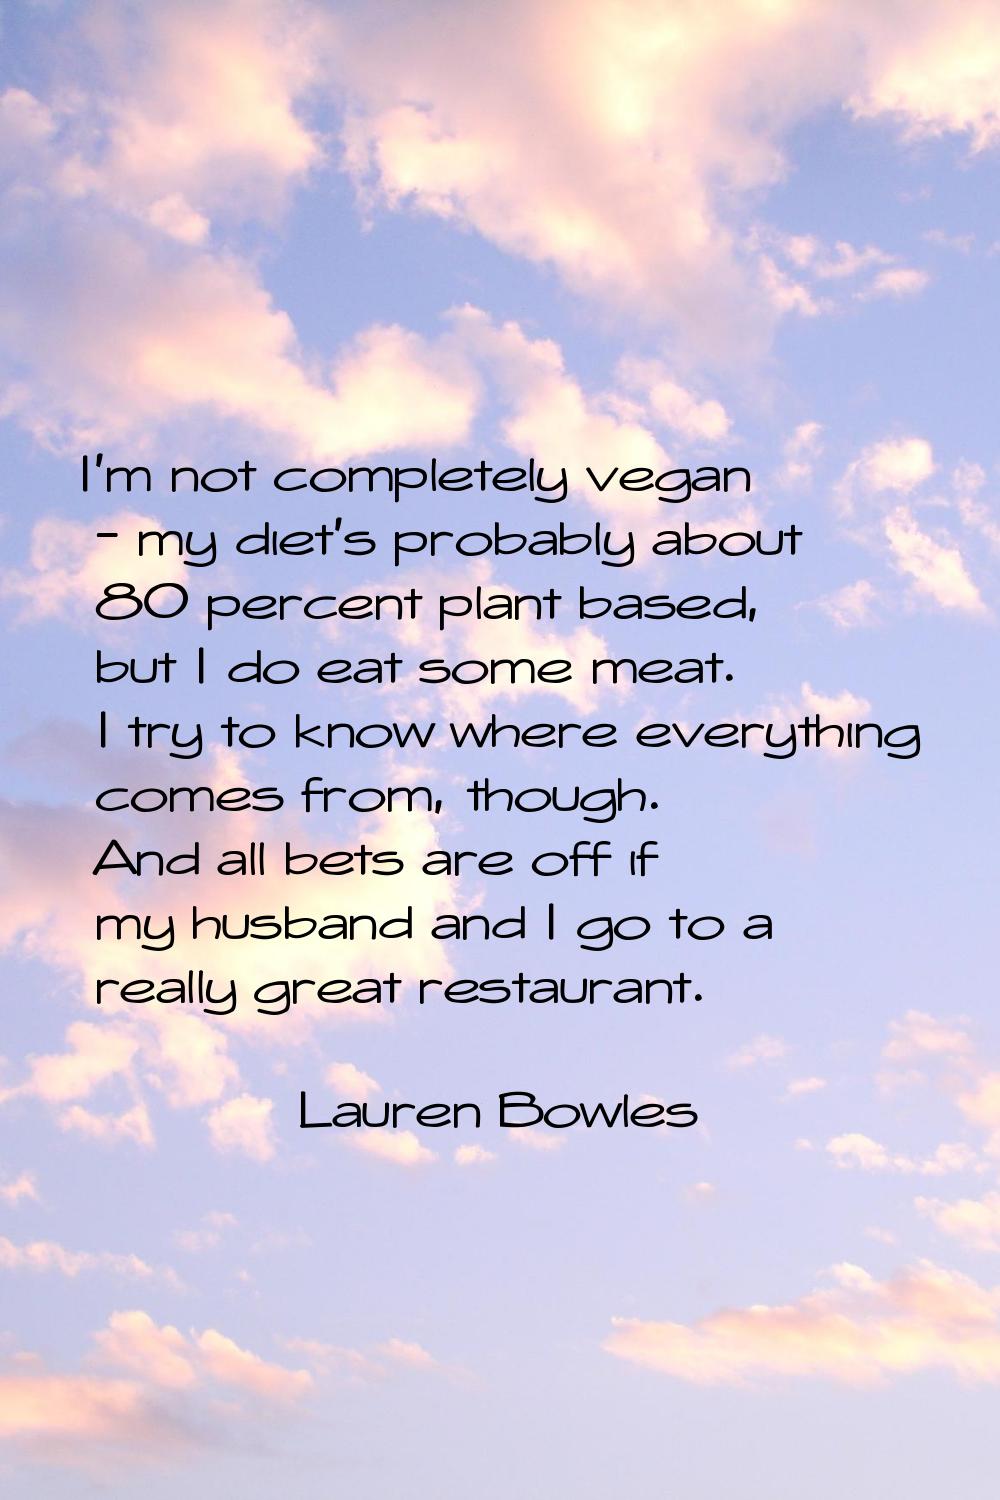 I'm not completely vegan - my diet's probably about 80 percent plant based, but I do eat some meat.